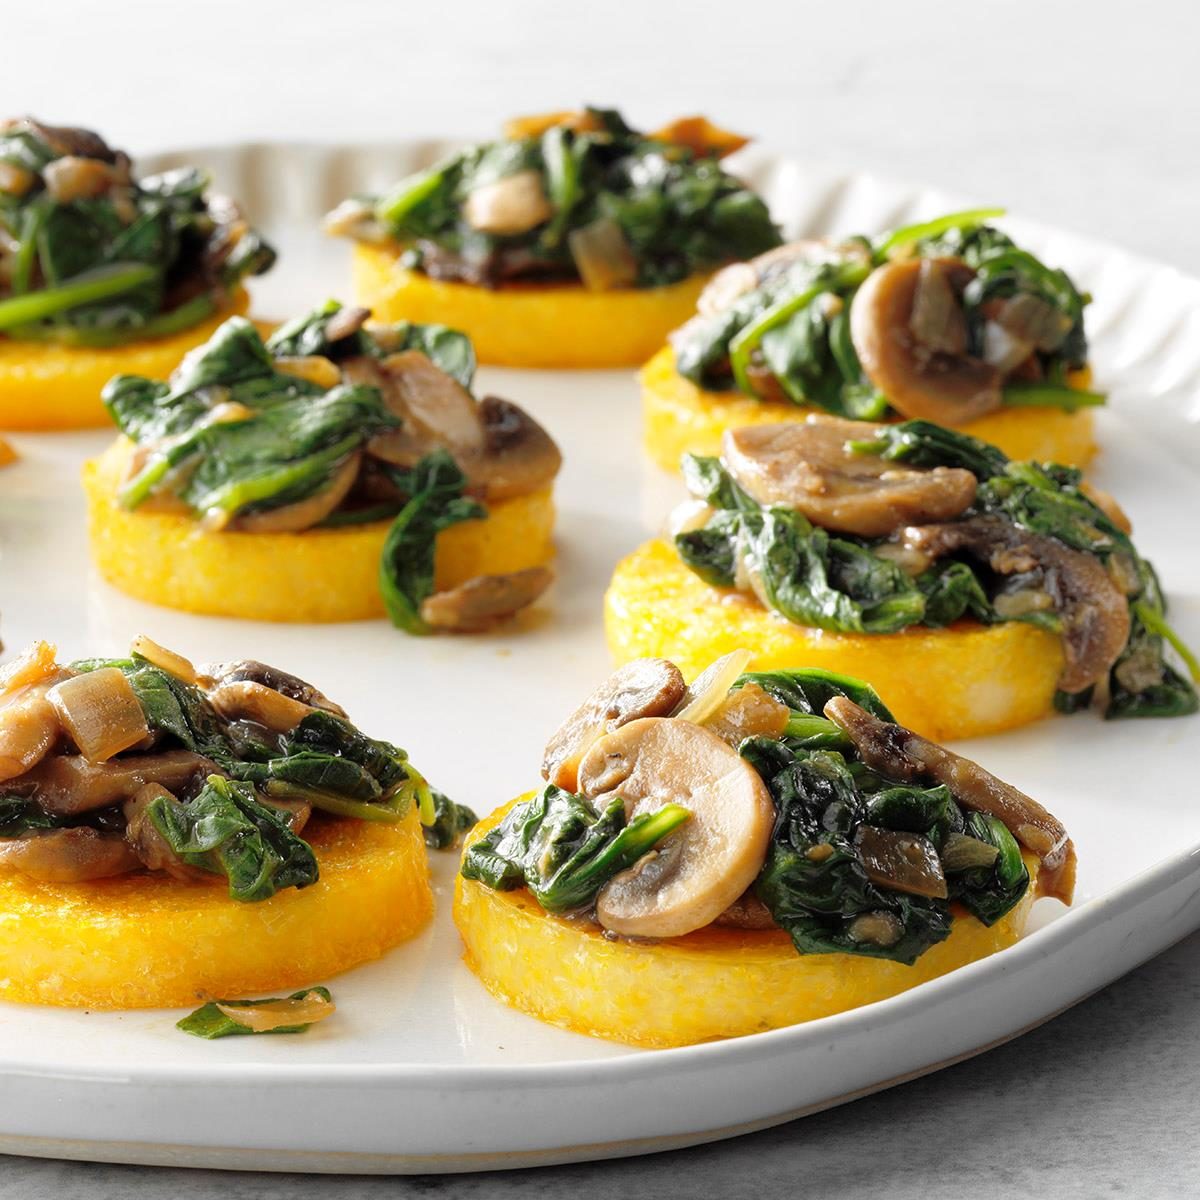 Vegan Polenta with Mushrooms and Spinach